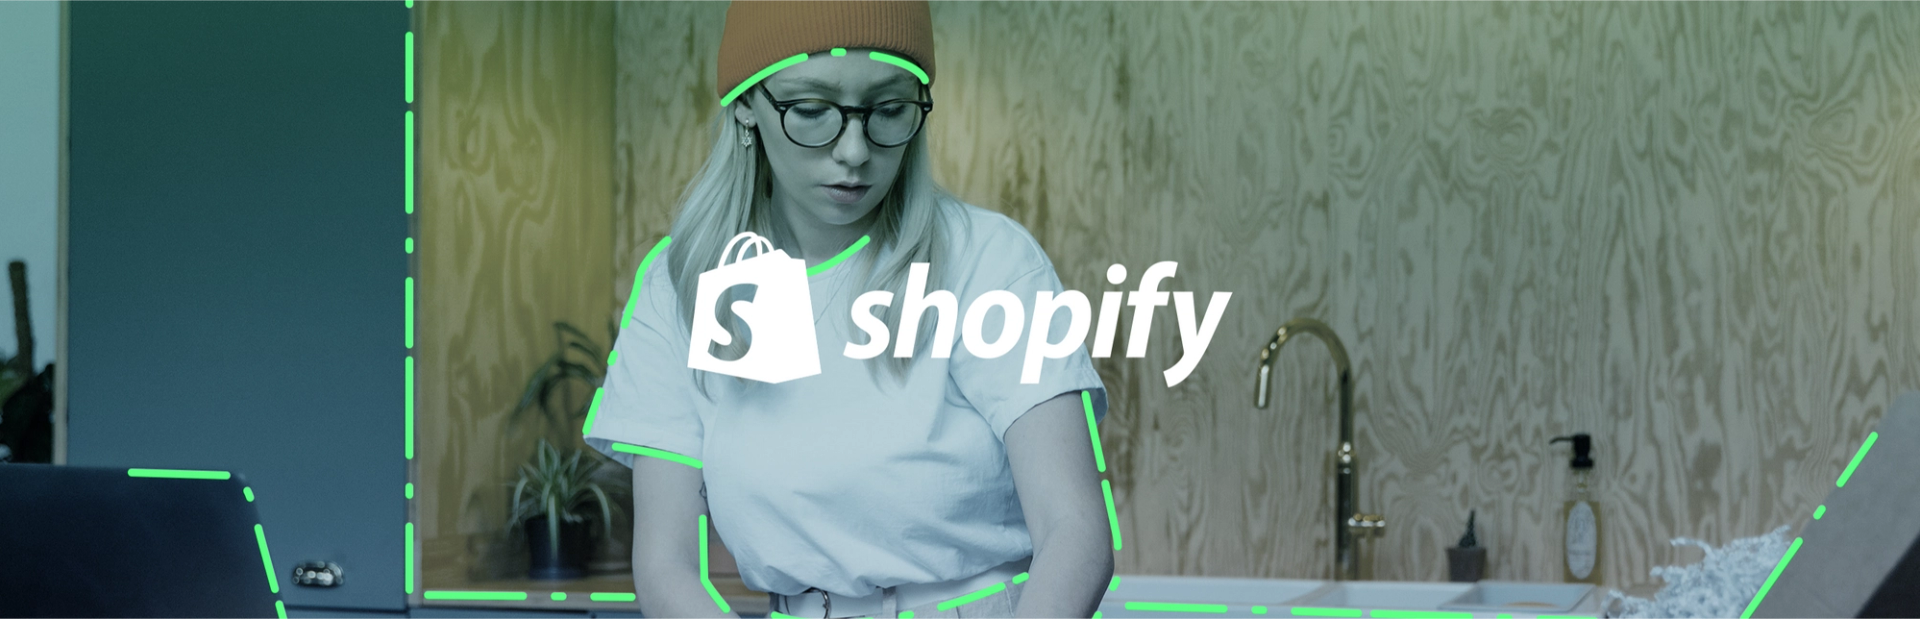 How Shopify Built a Growth Workshop to Unlock Rapid Experimentation